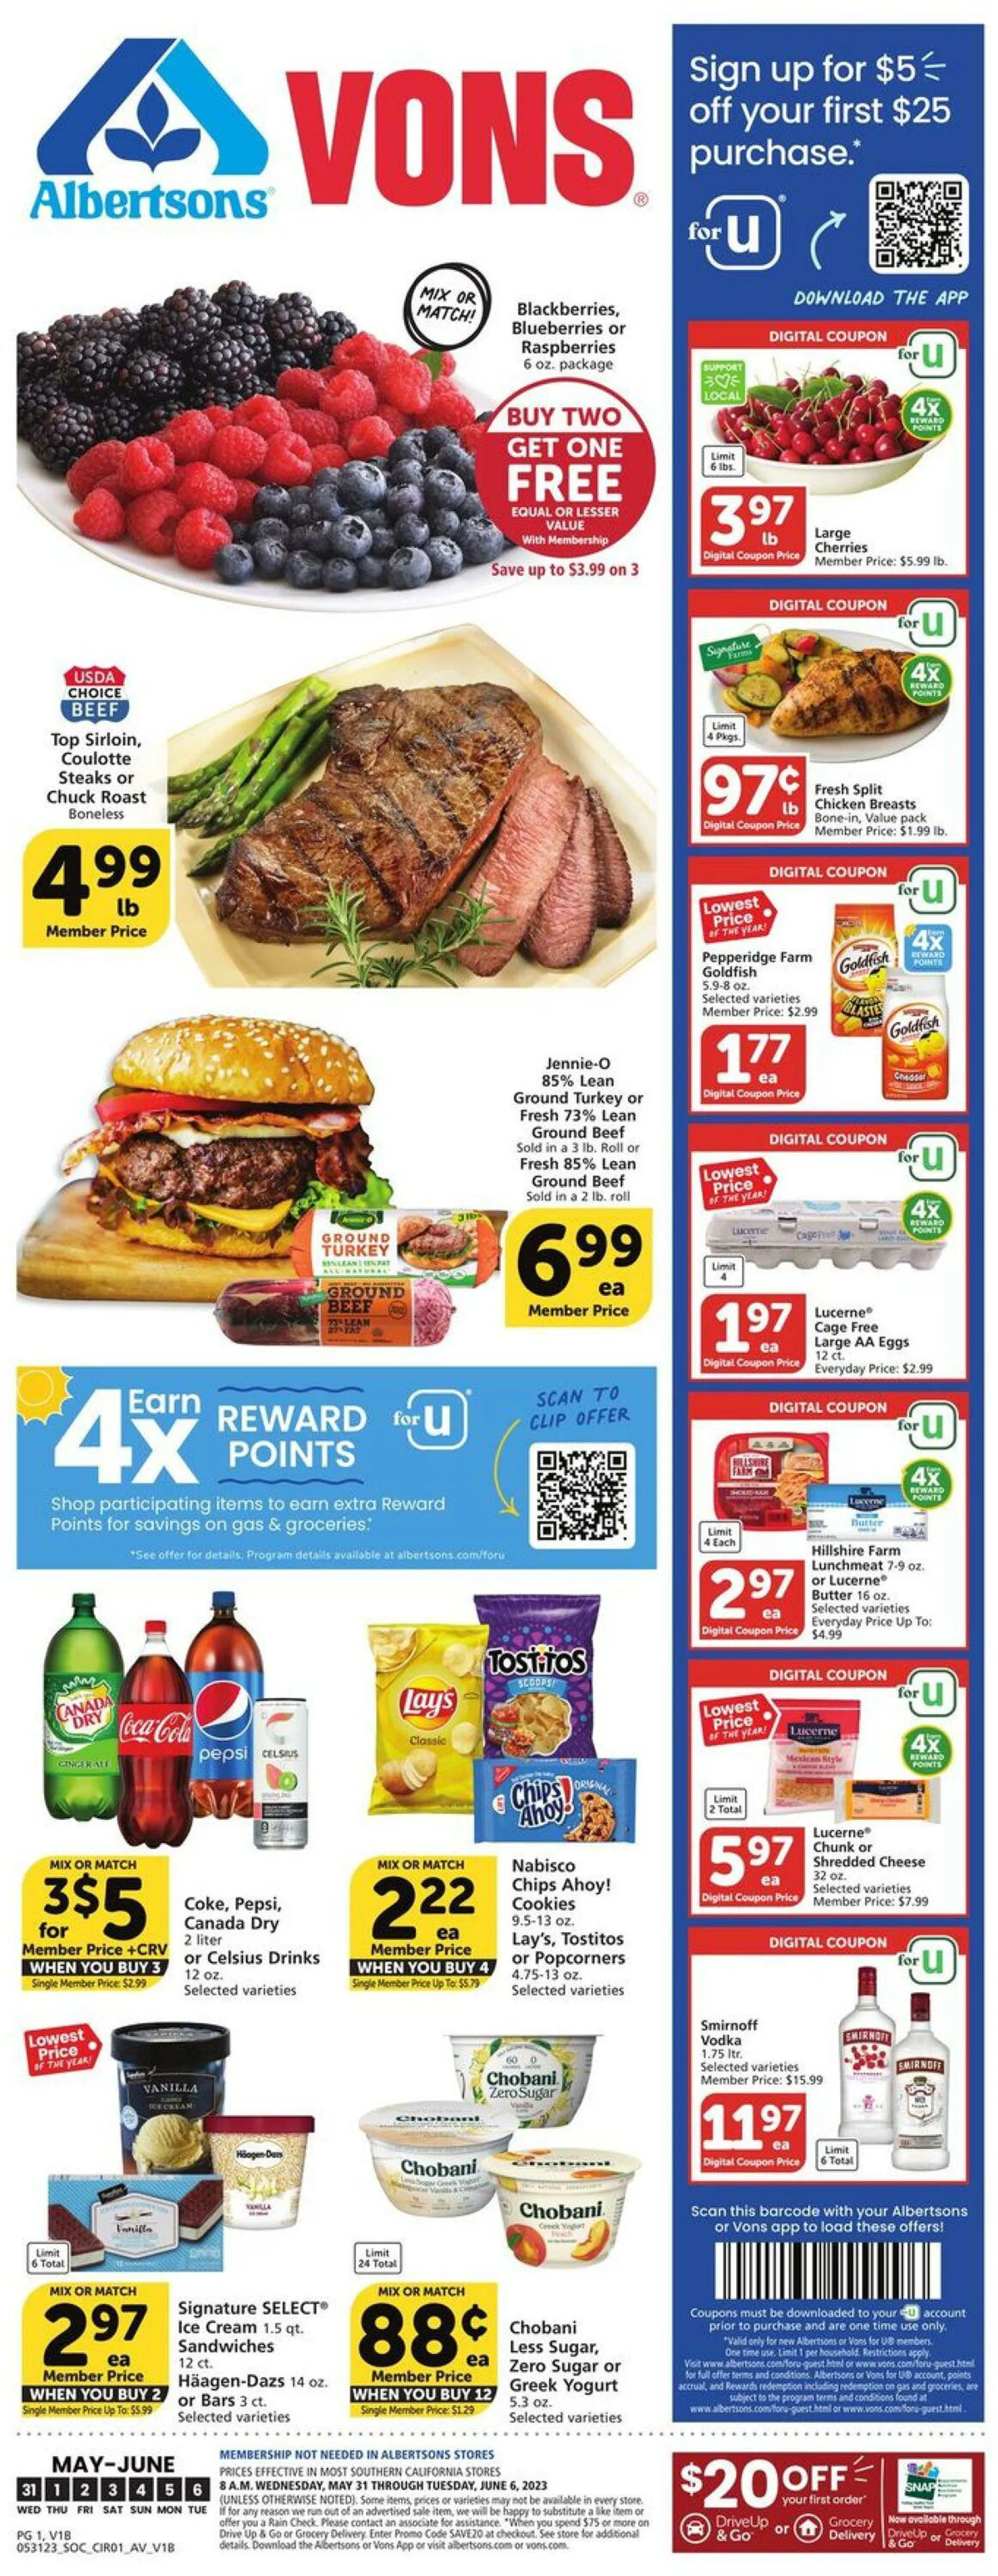 Vons Current weekly ad - 1